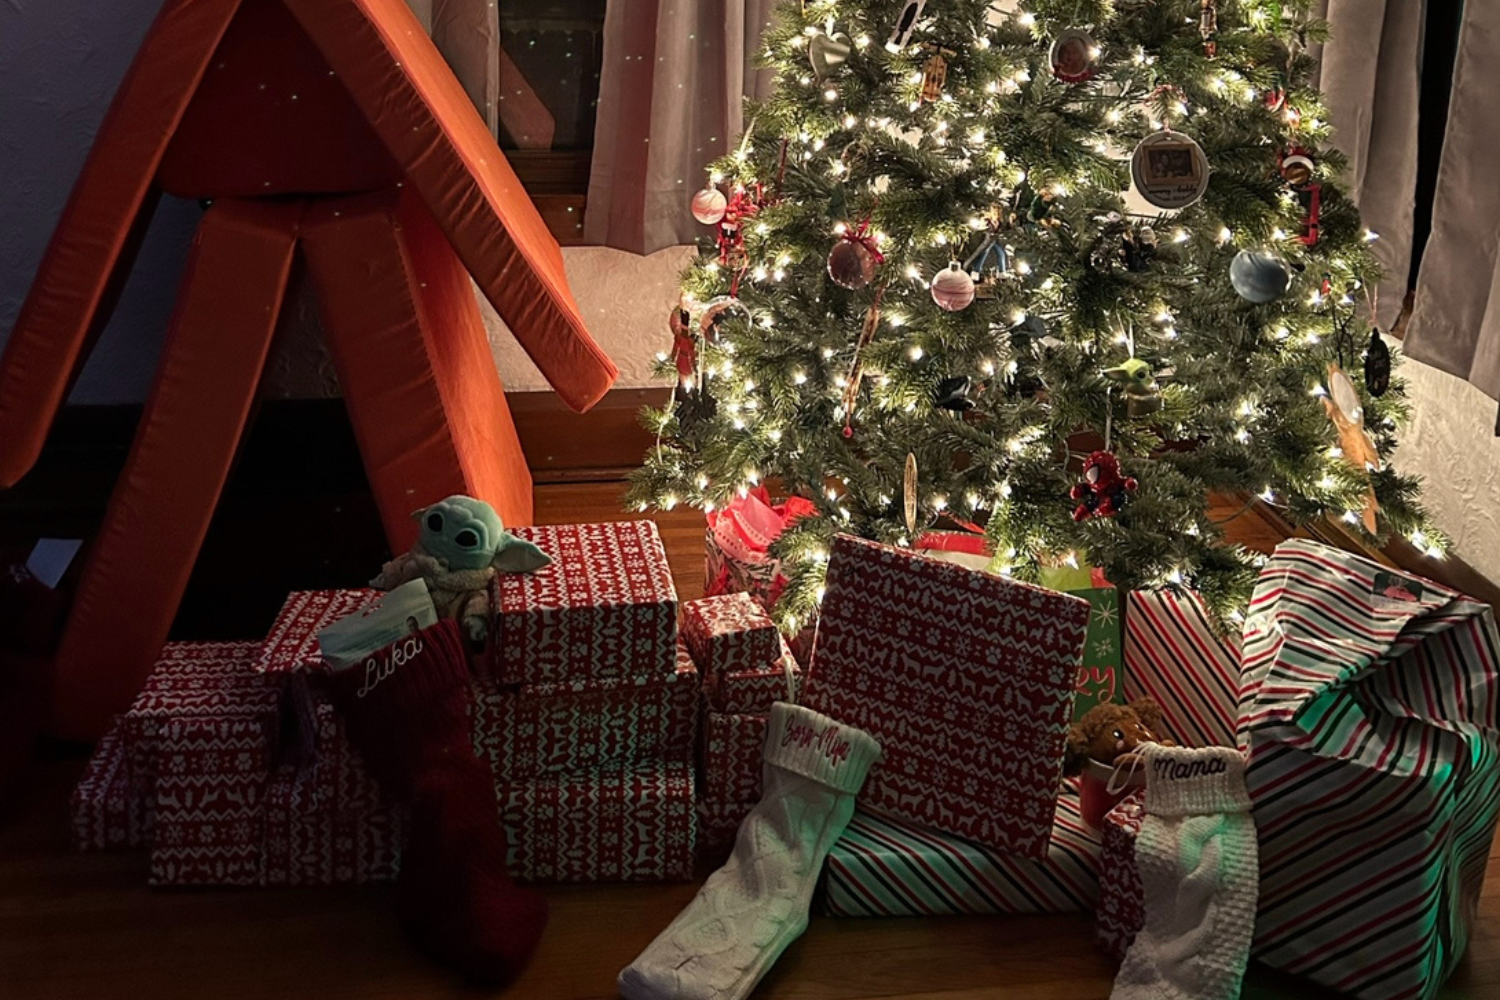 Christmas gifts waiting under the tree for eager children.